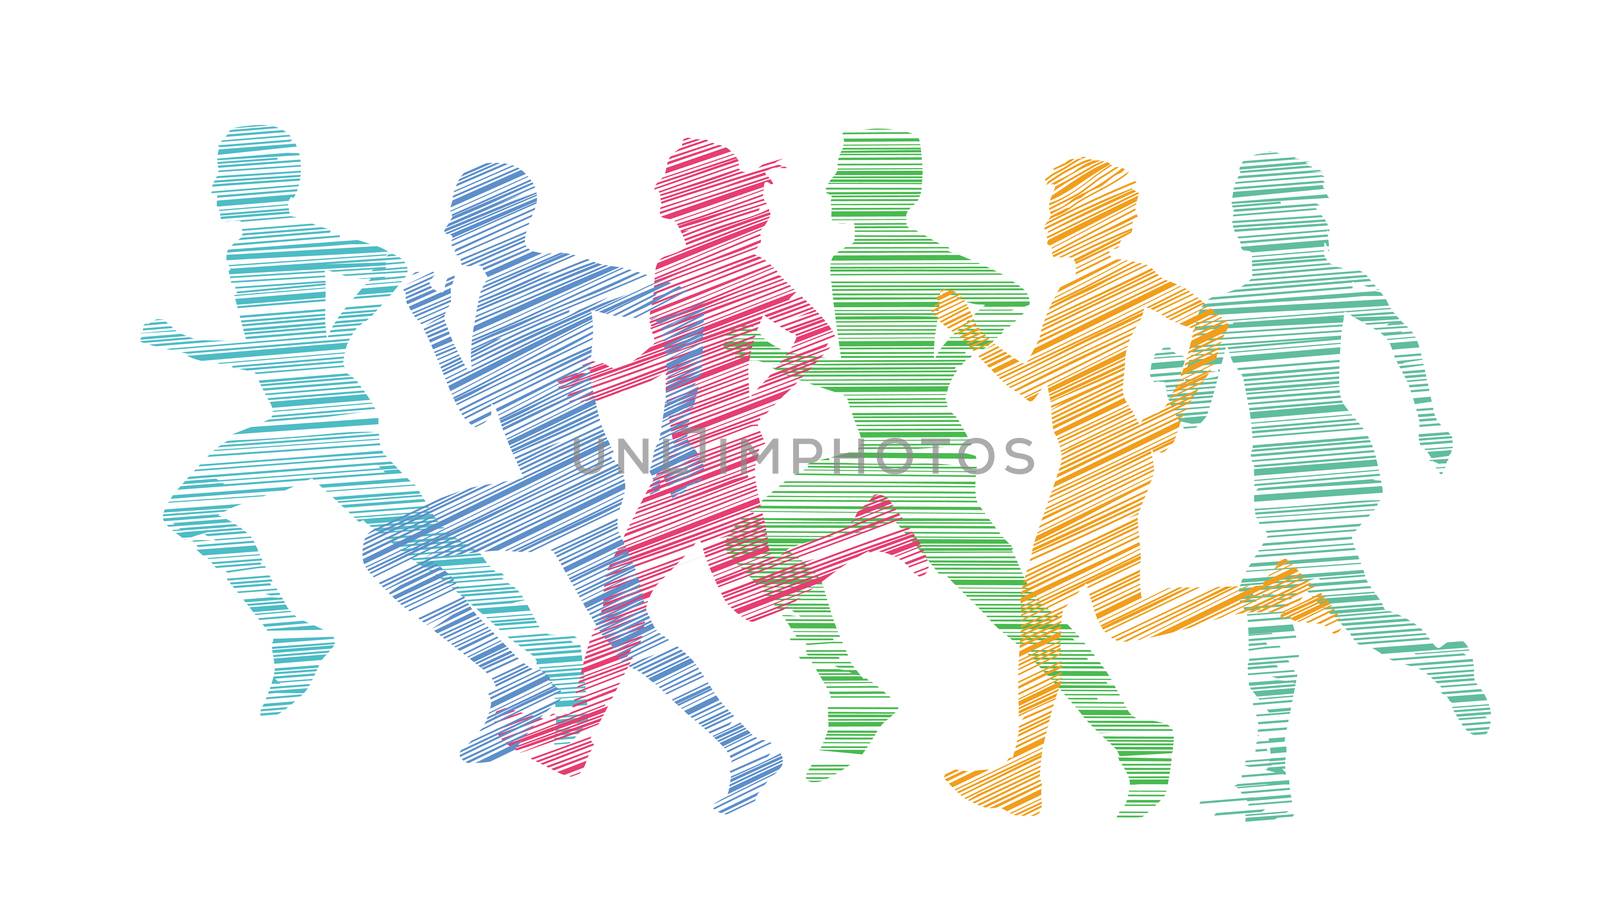 Running people doing sports by scusi